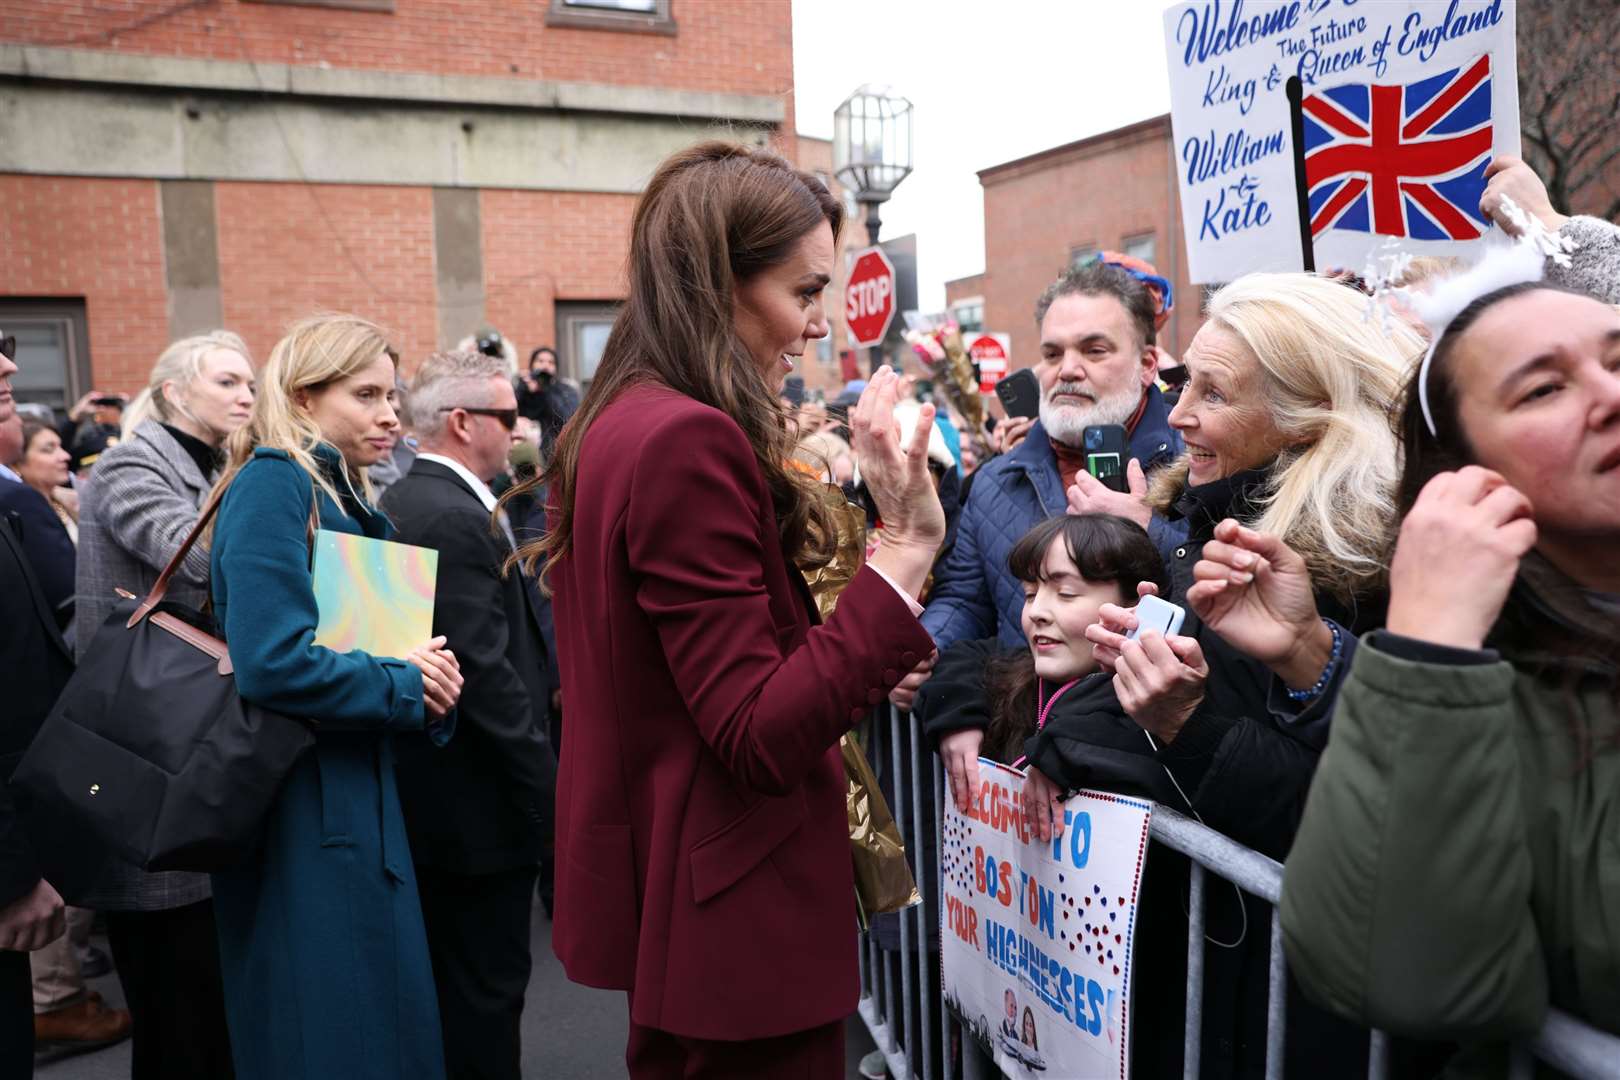 The Princess of Wales meets well-wishers during a visit to Roca, in Chelsea, Massachusetts (Ian Vogler/Daily Mirror/PA)